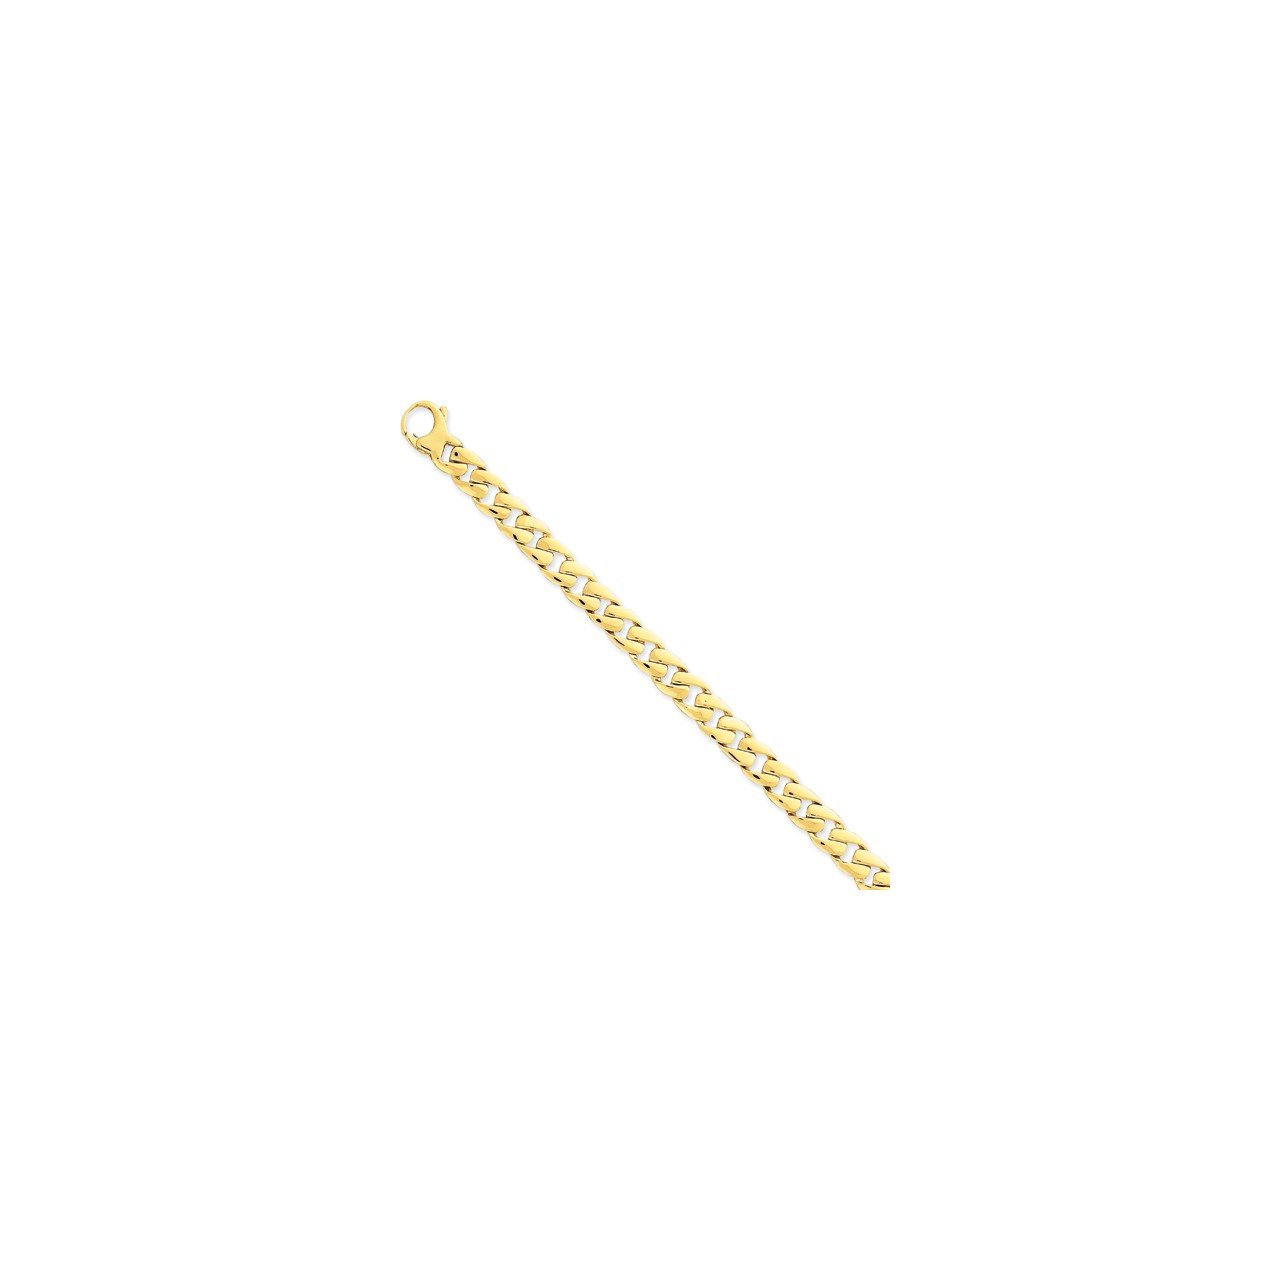 14k 8.25mm Solid Hand-Polished Oval Curb Link Chain